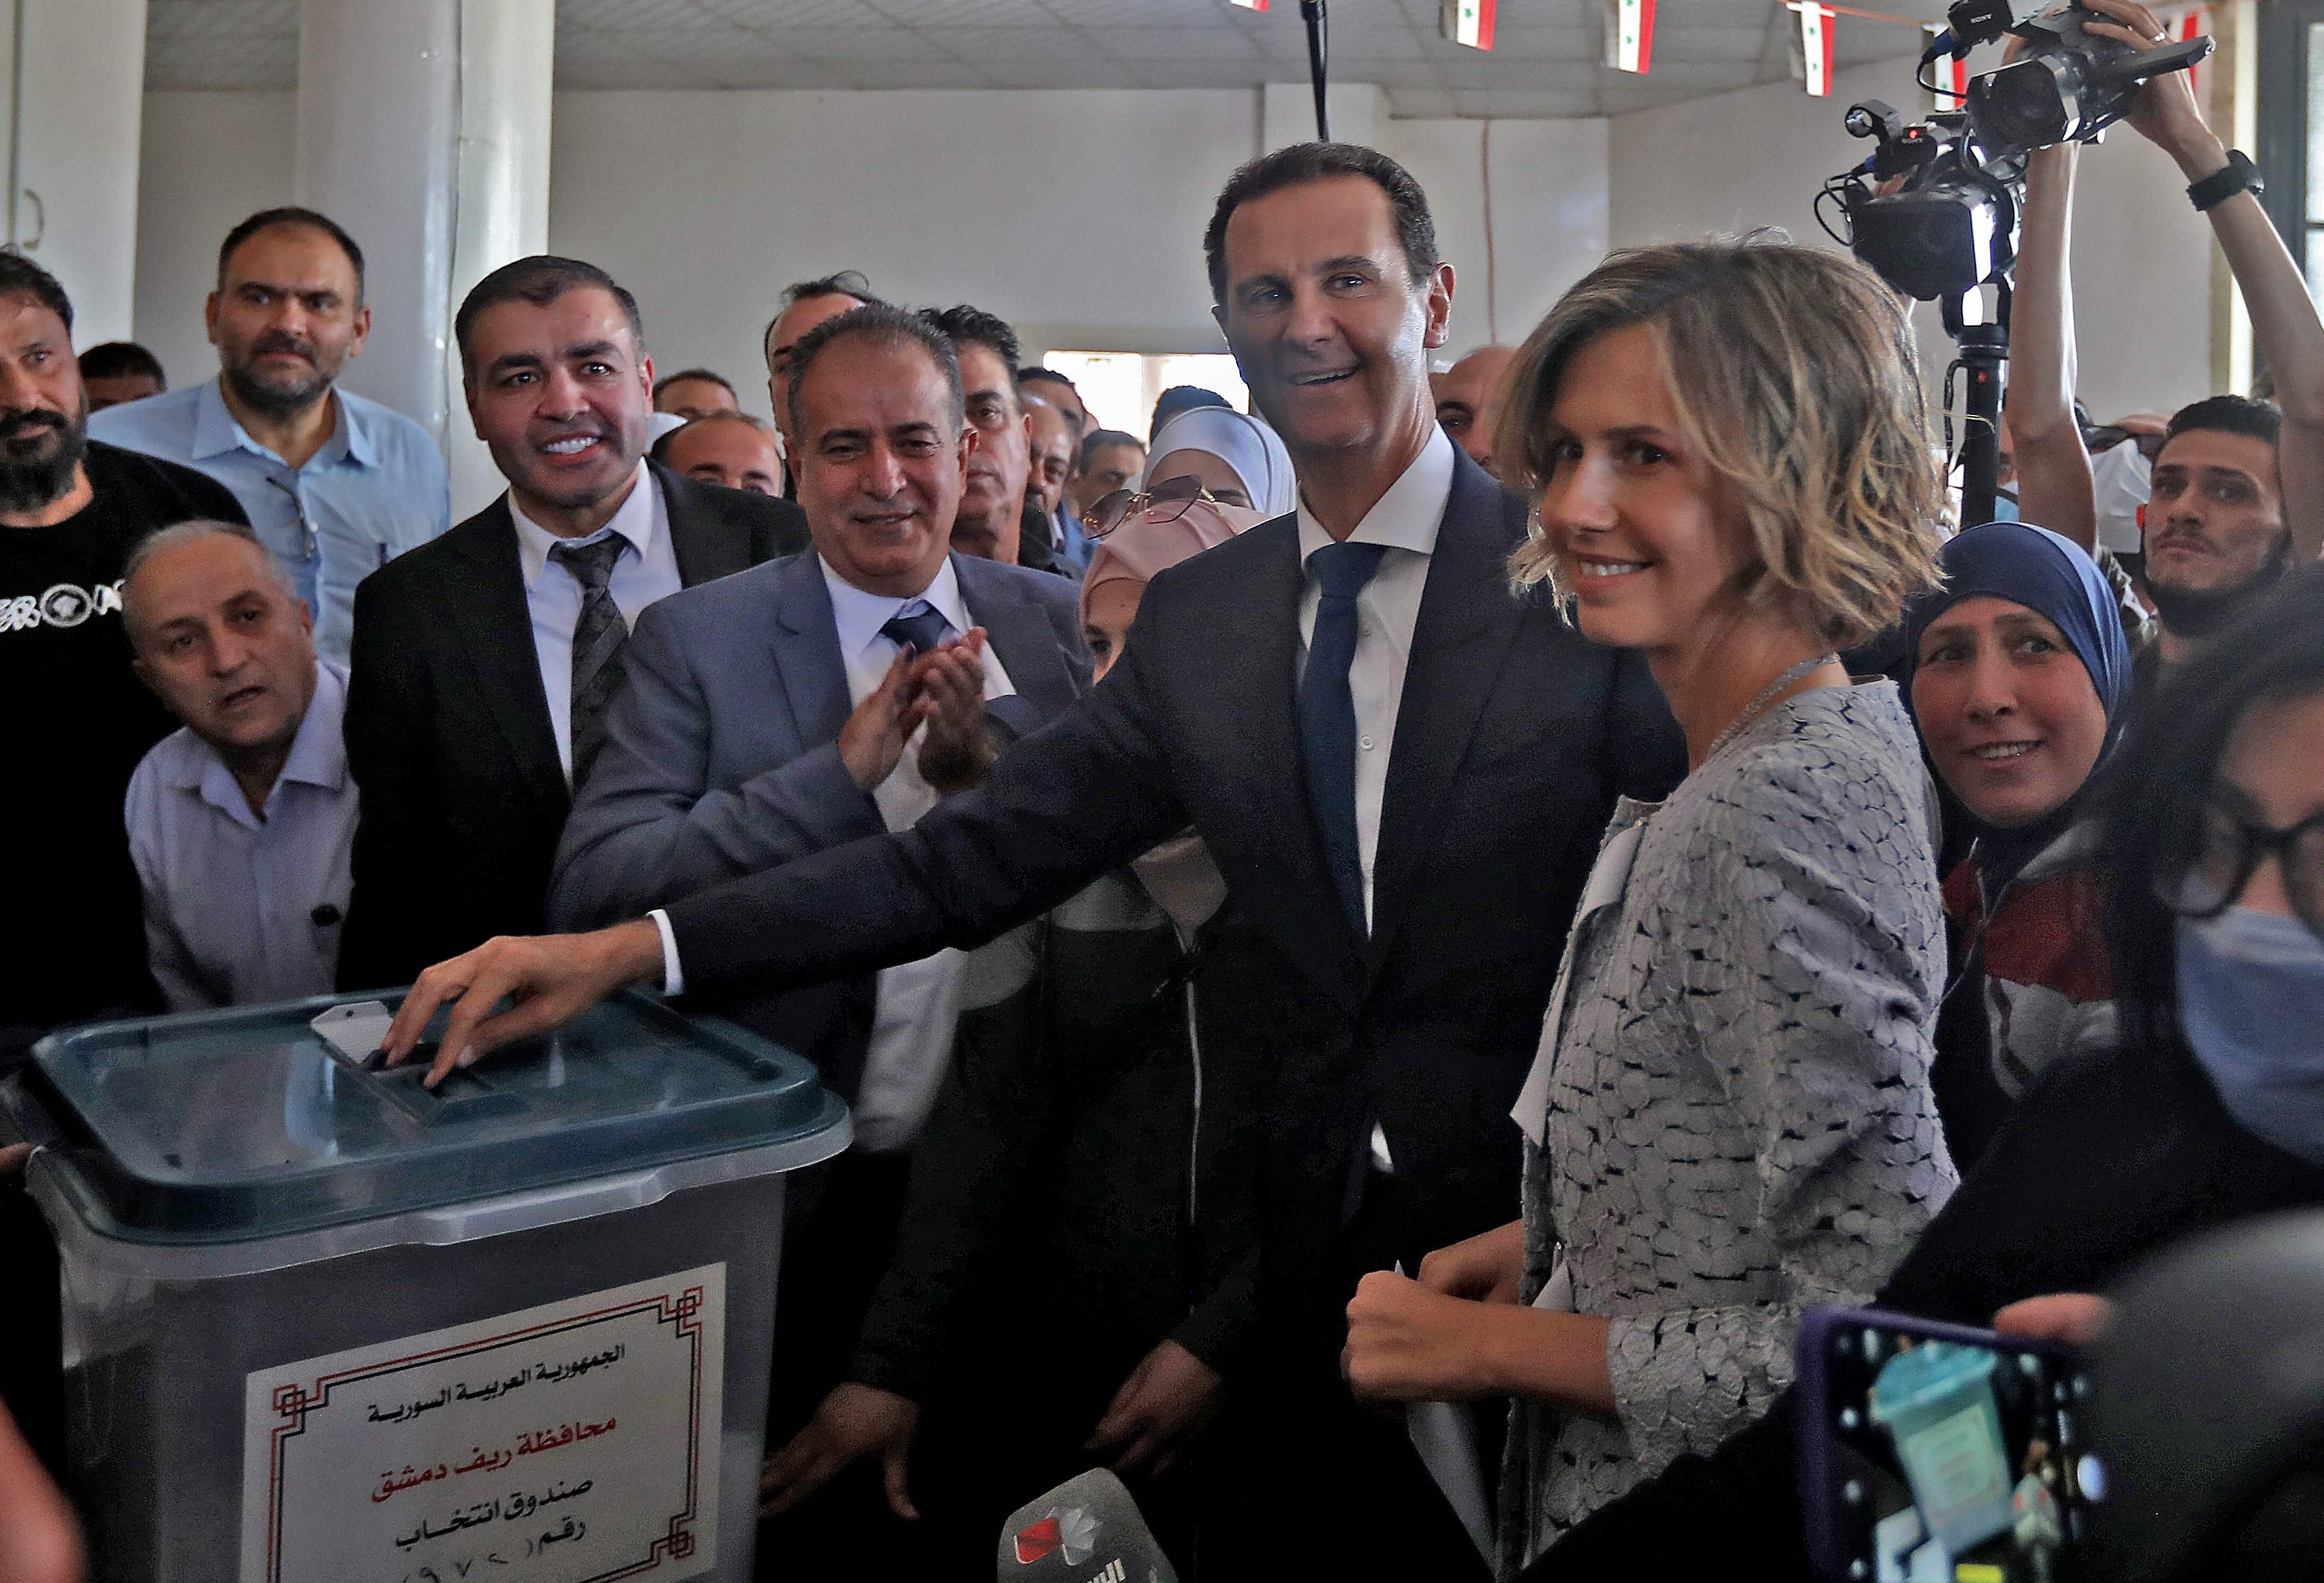 In this file photo taken on May 26, 2021, Syrian President Bashar al-Assad (C) and his wife Asma (R) cast their votes at a polling station in Douma, near Damascus, May 26, 2021. (Photo via AFP)